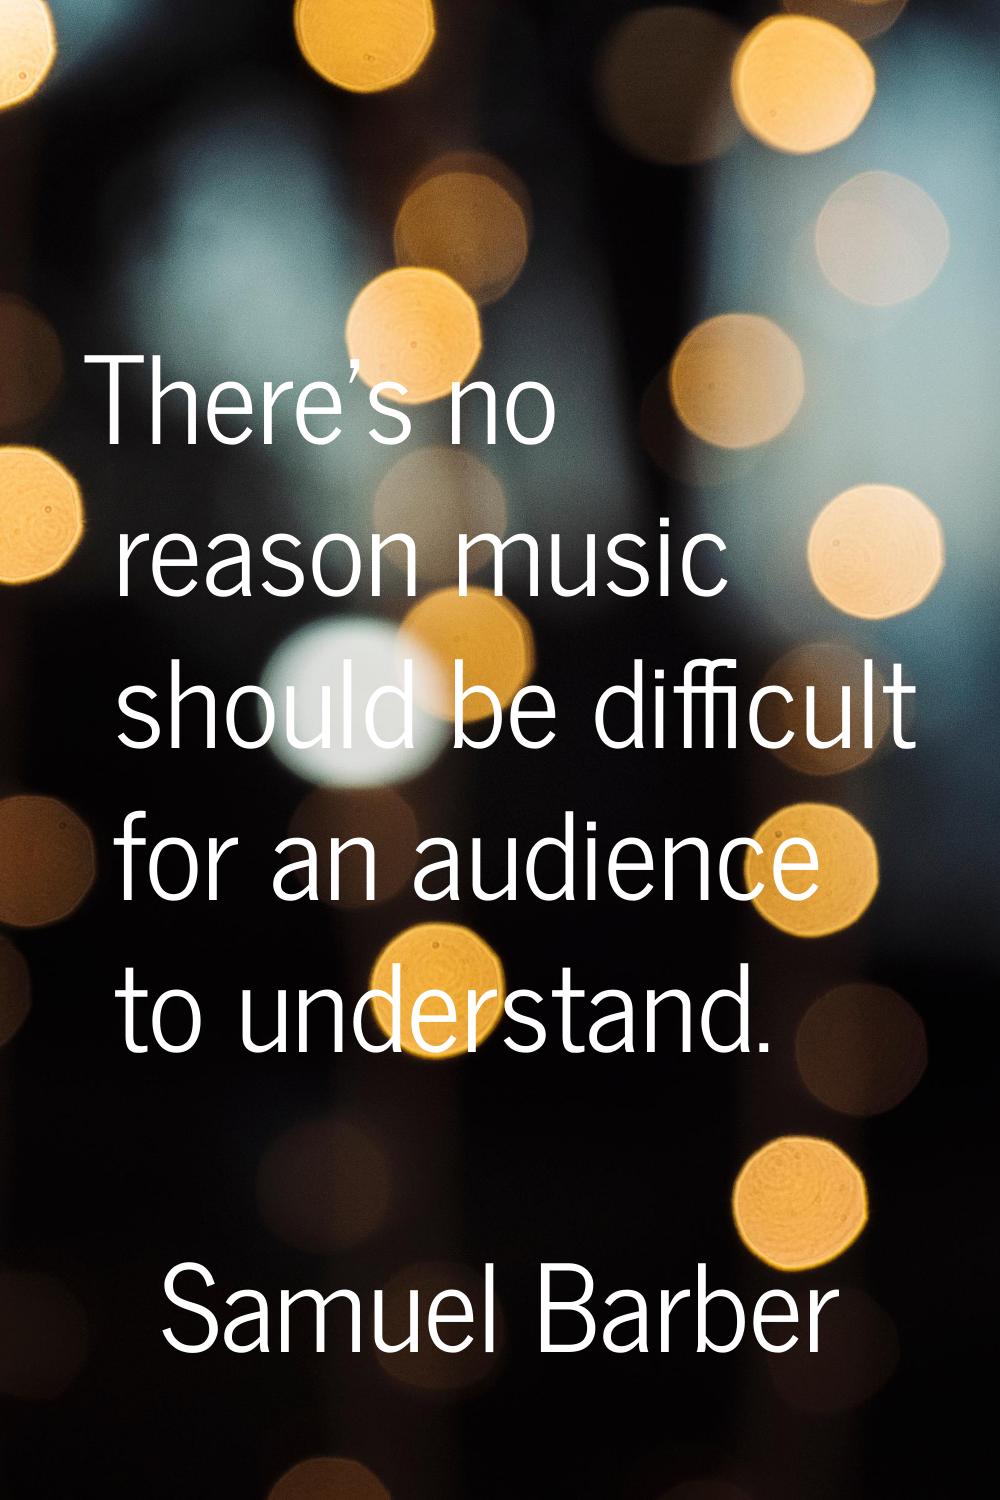 There's no reason music should be difficult for an audience to understand.